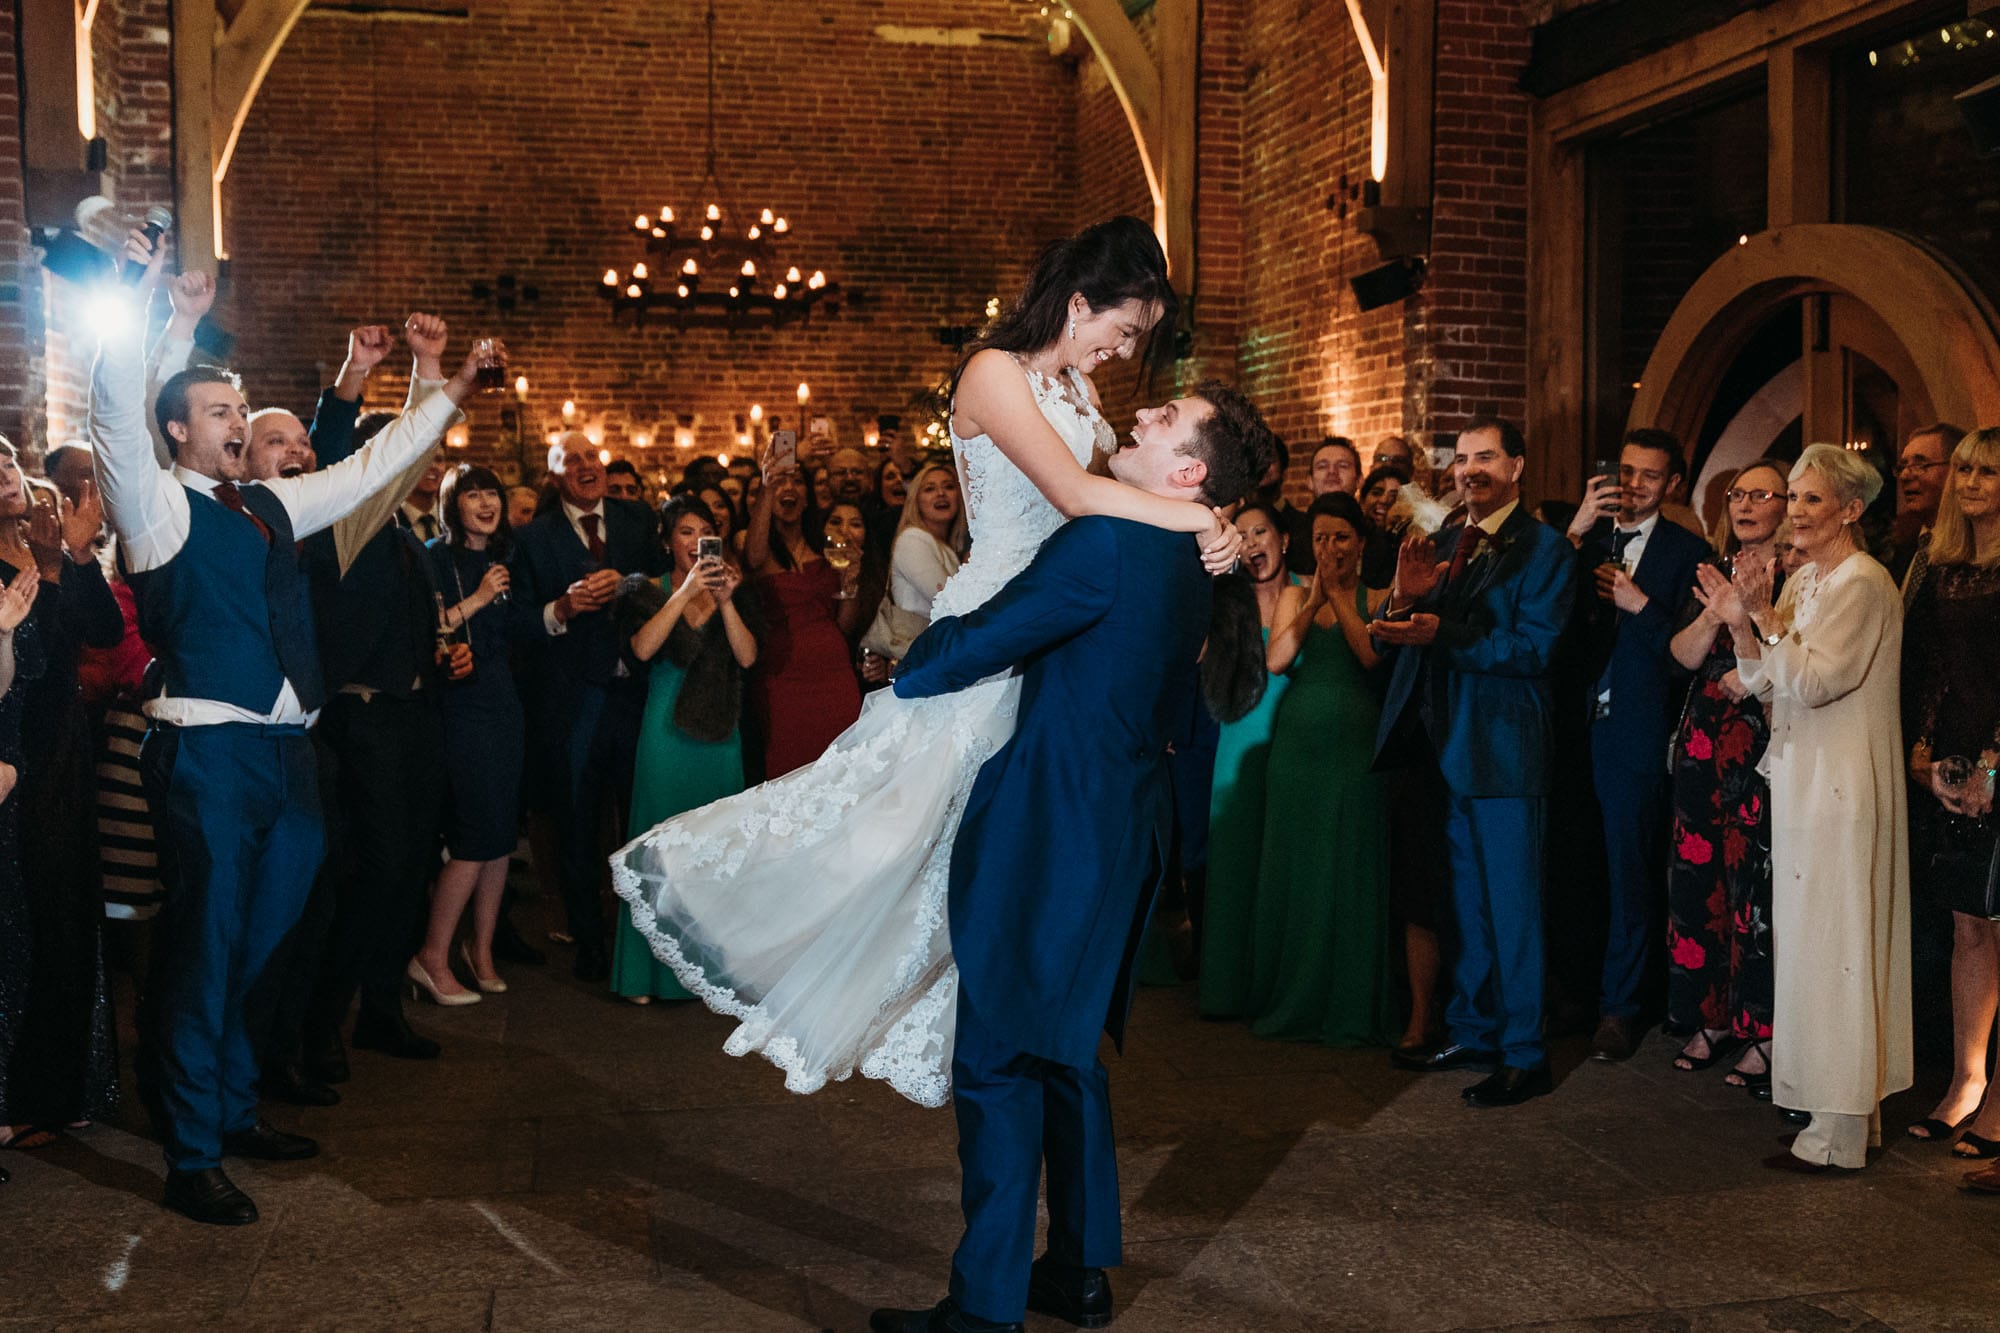 groom picks bride up during first dance for a spin. Guests look on clapping and cheering